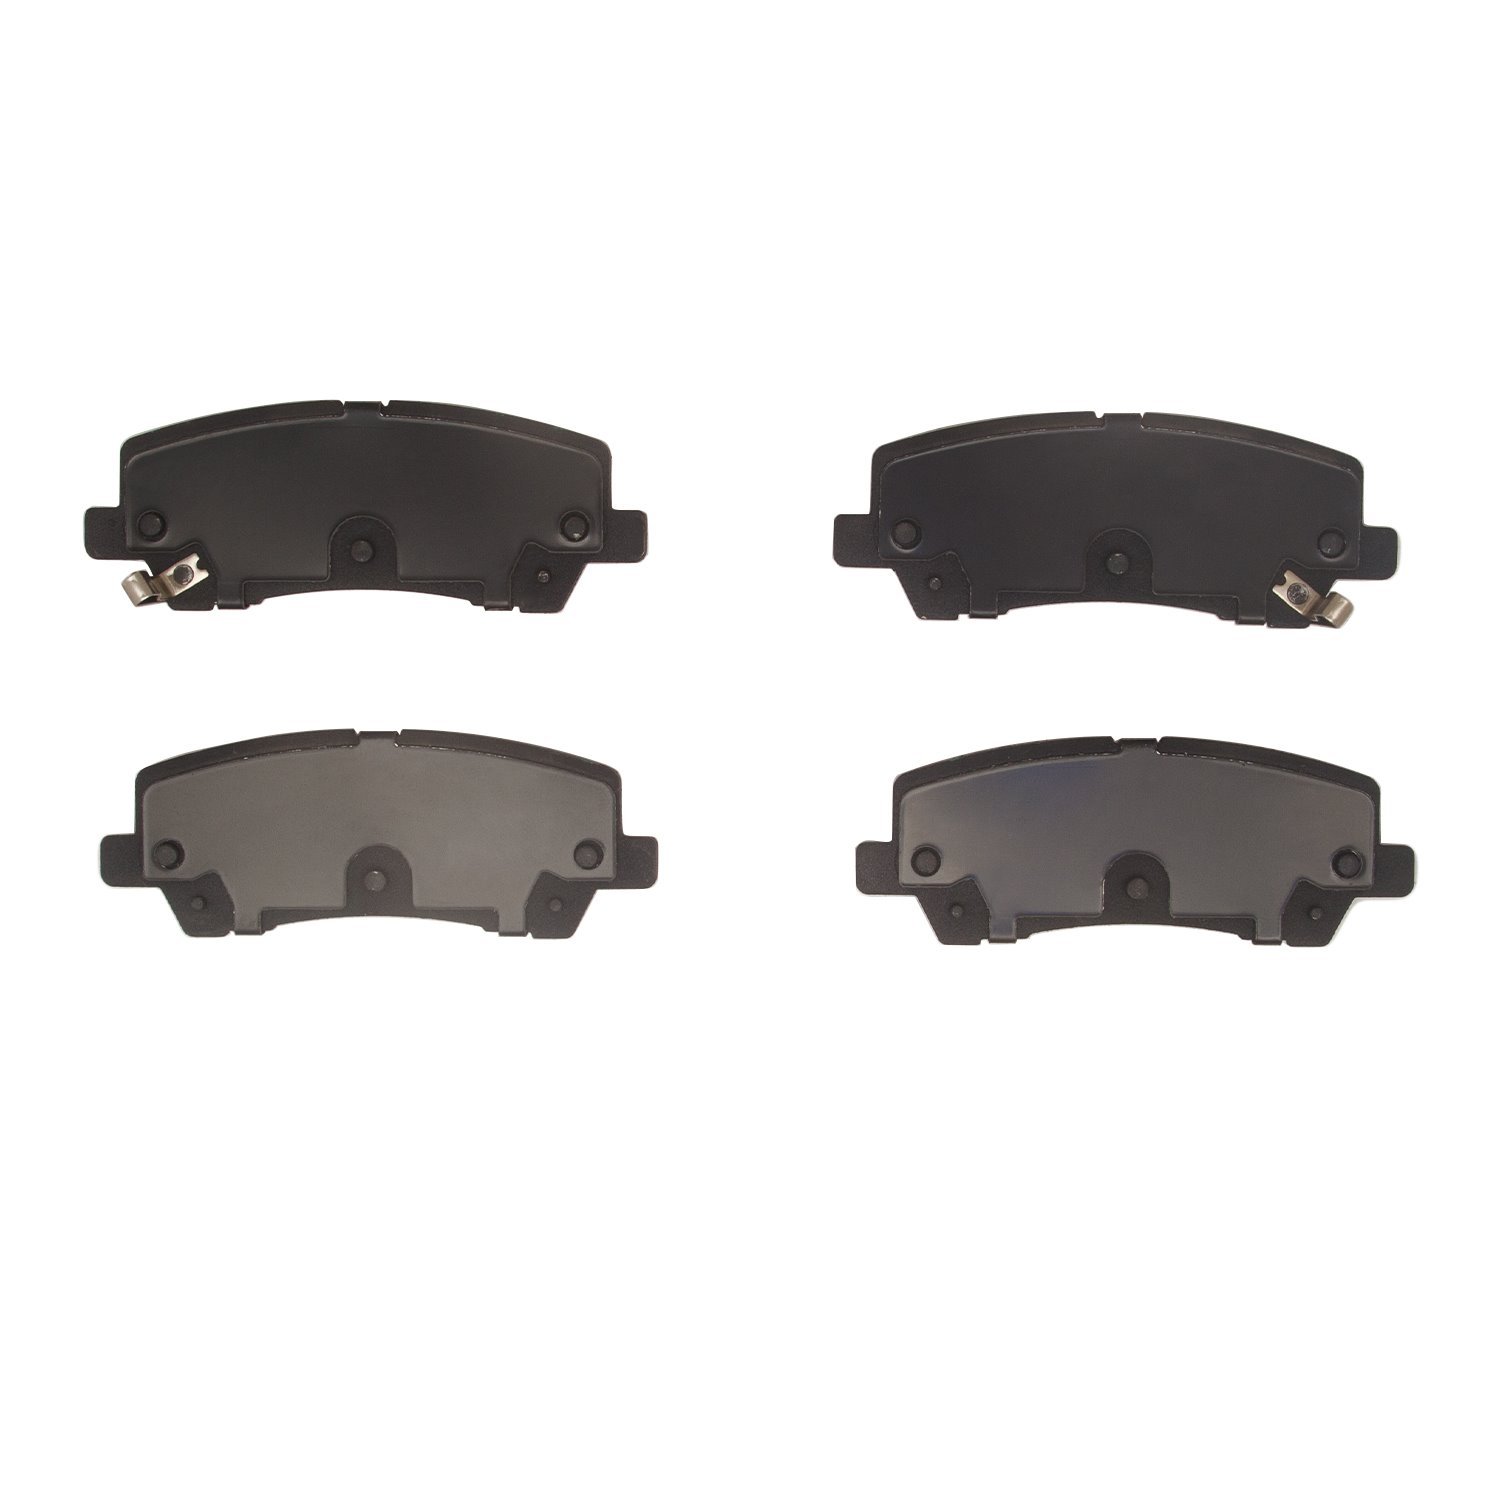 1551-2412-00 5000 Advanced Ceramic Brake Pads, Fits Select Ford/Lincoln/Mercury/Mazda, Position: Rear